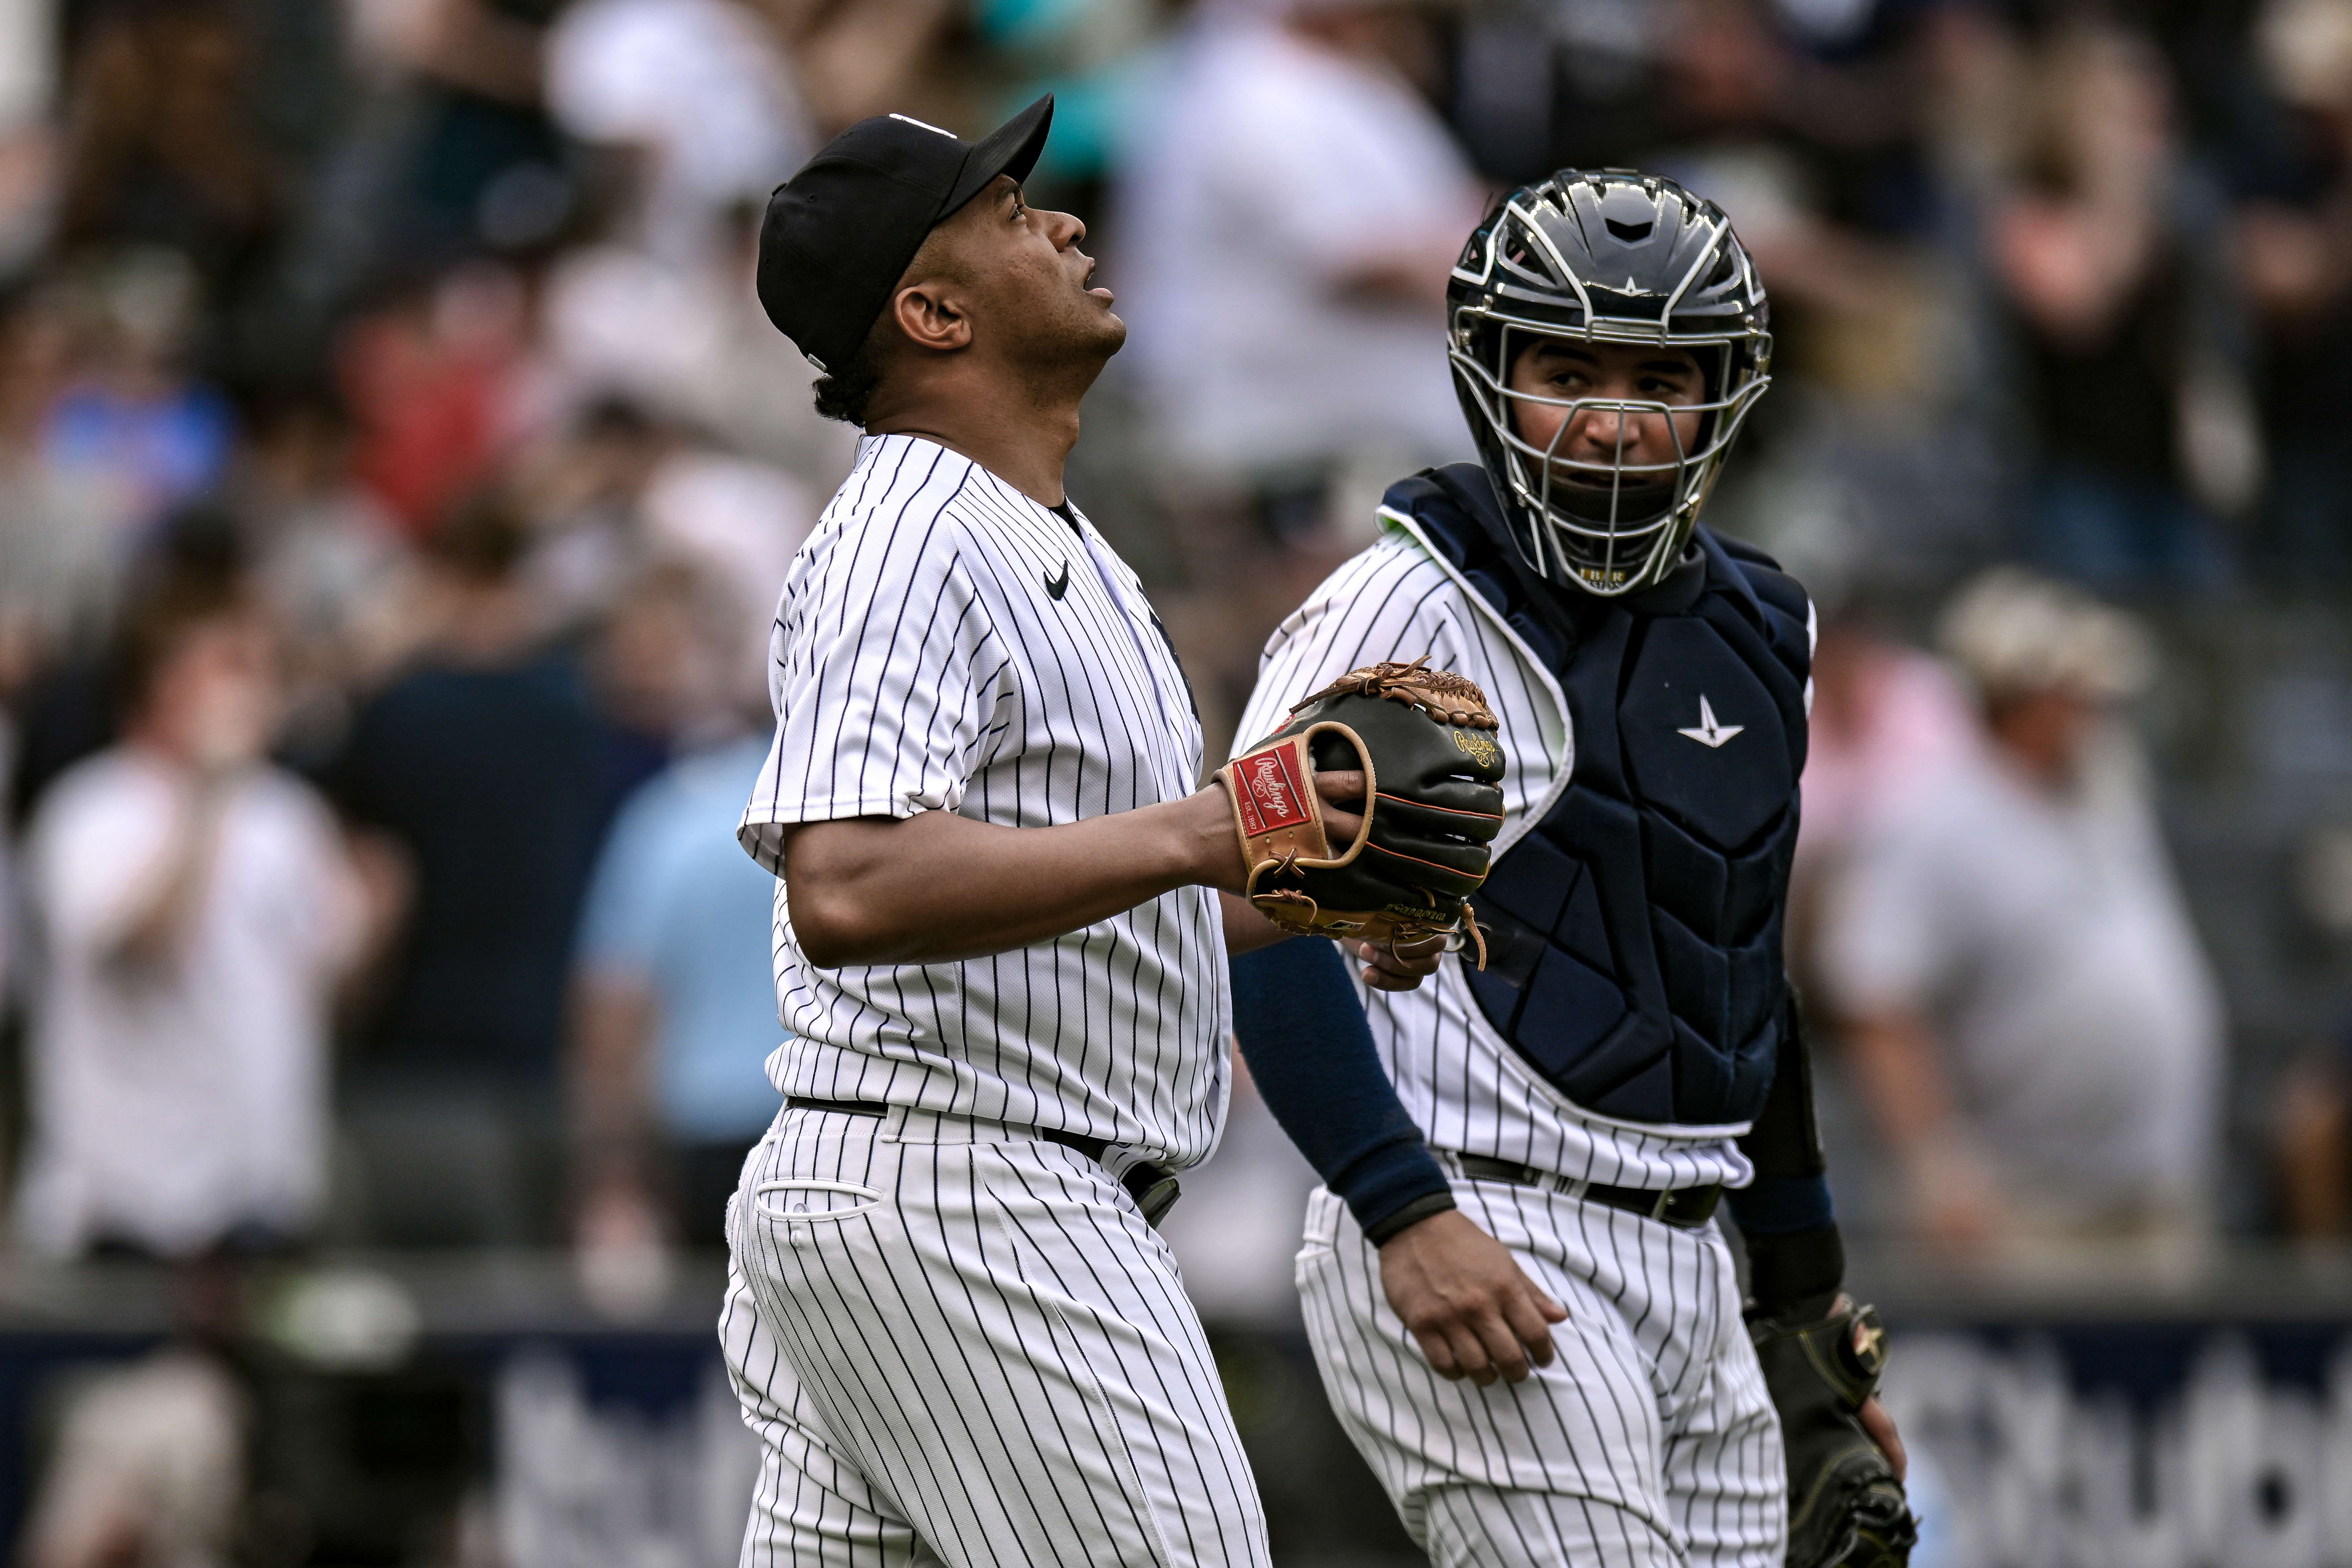 Aaron Judge's two-homer day leads Yankees past Rays, 9-8